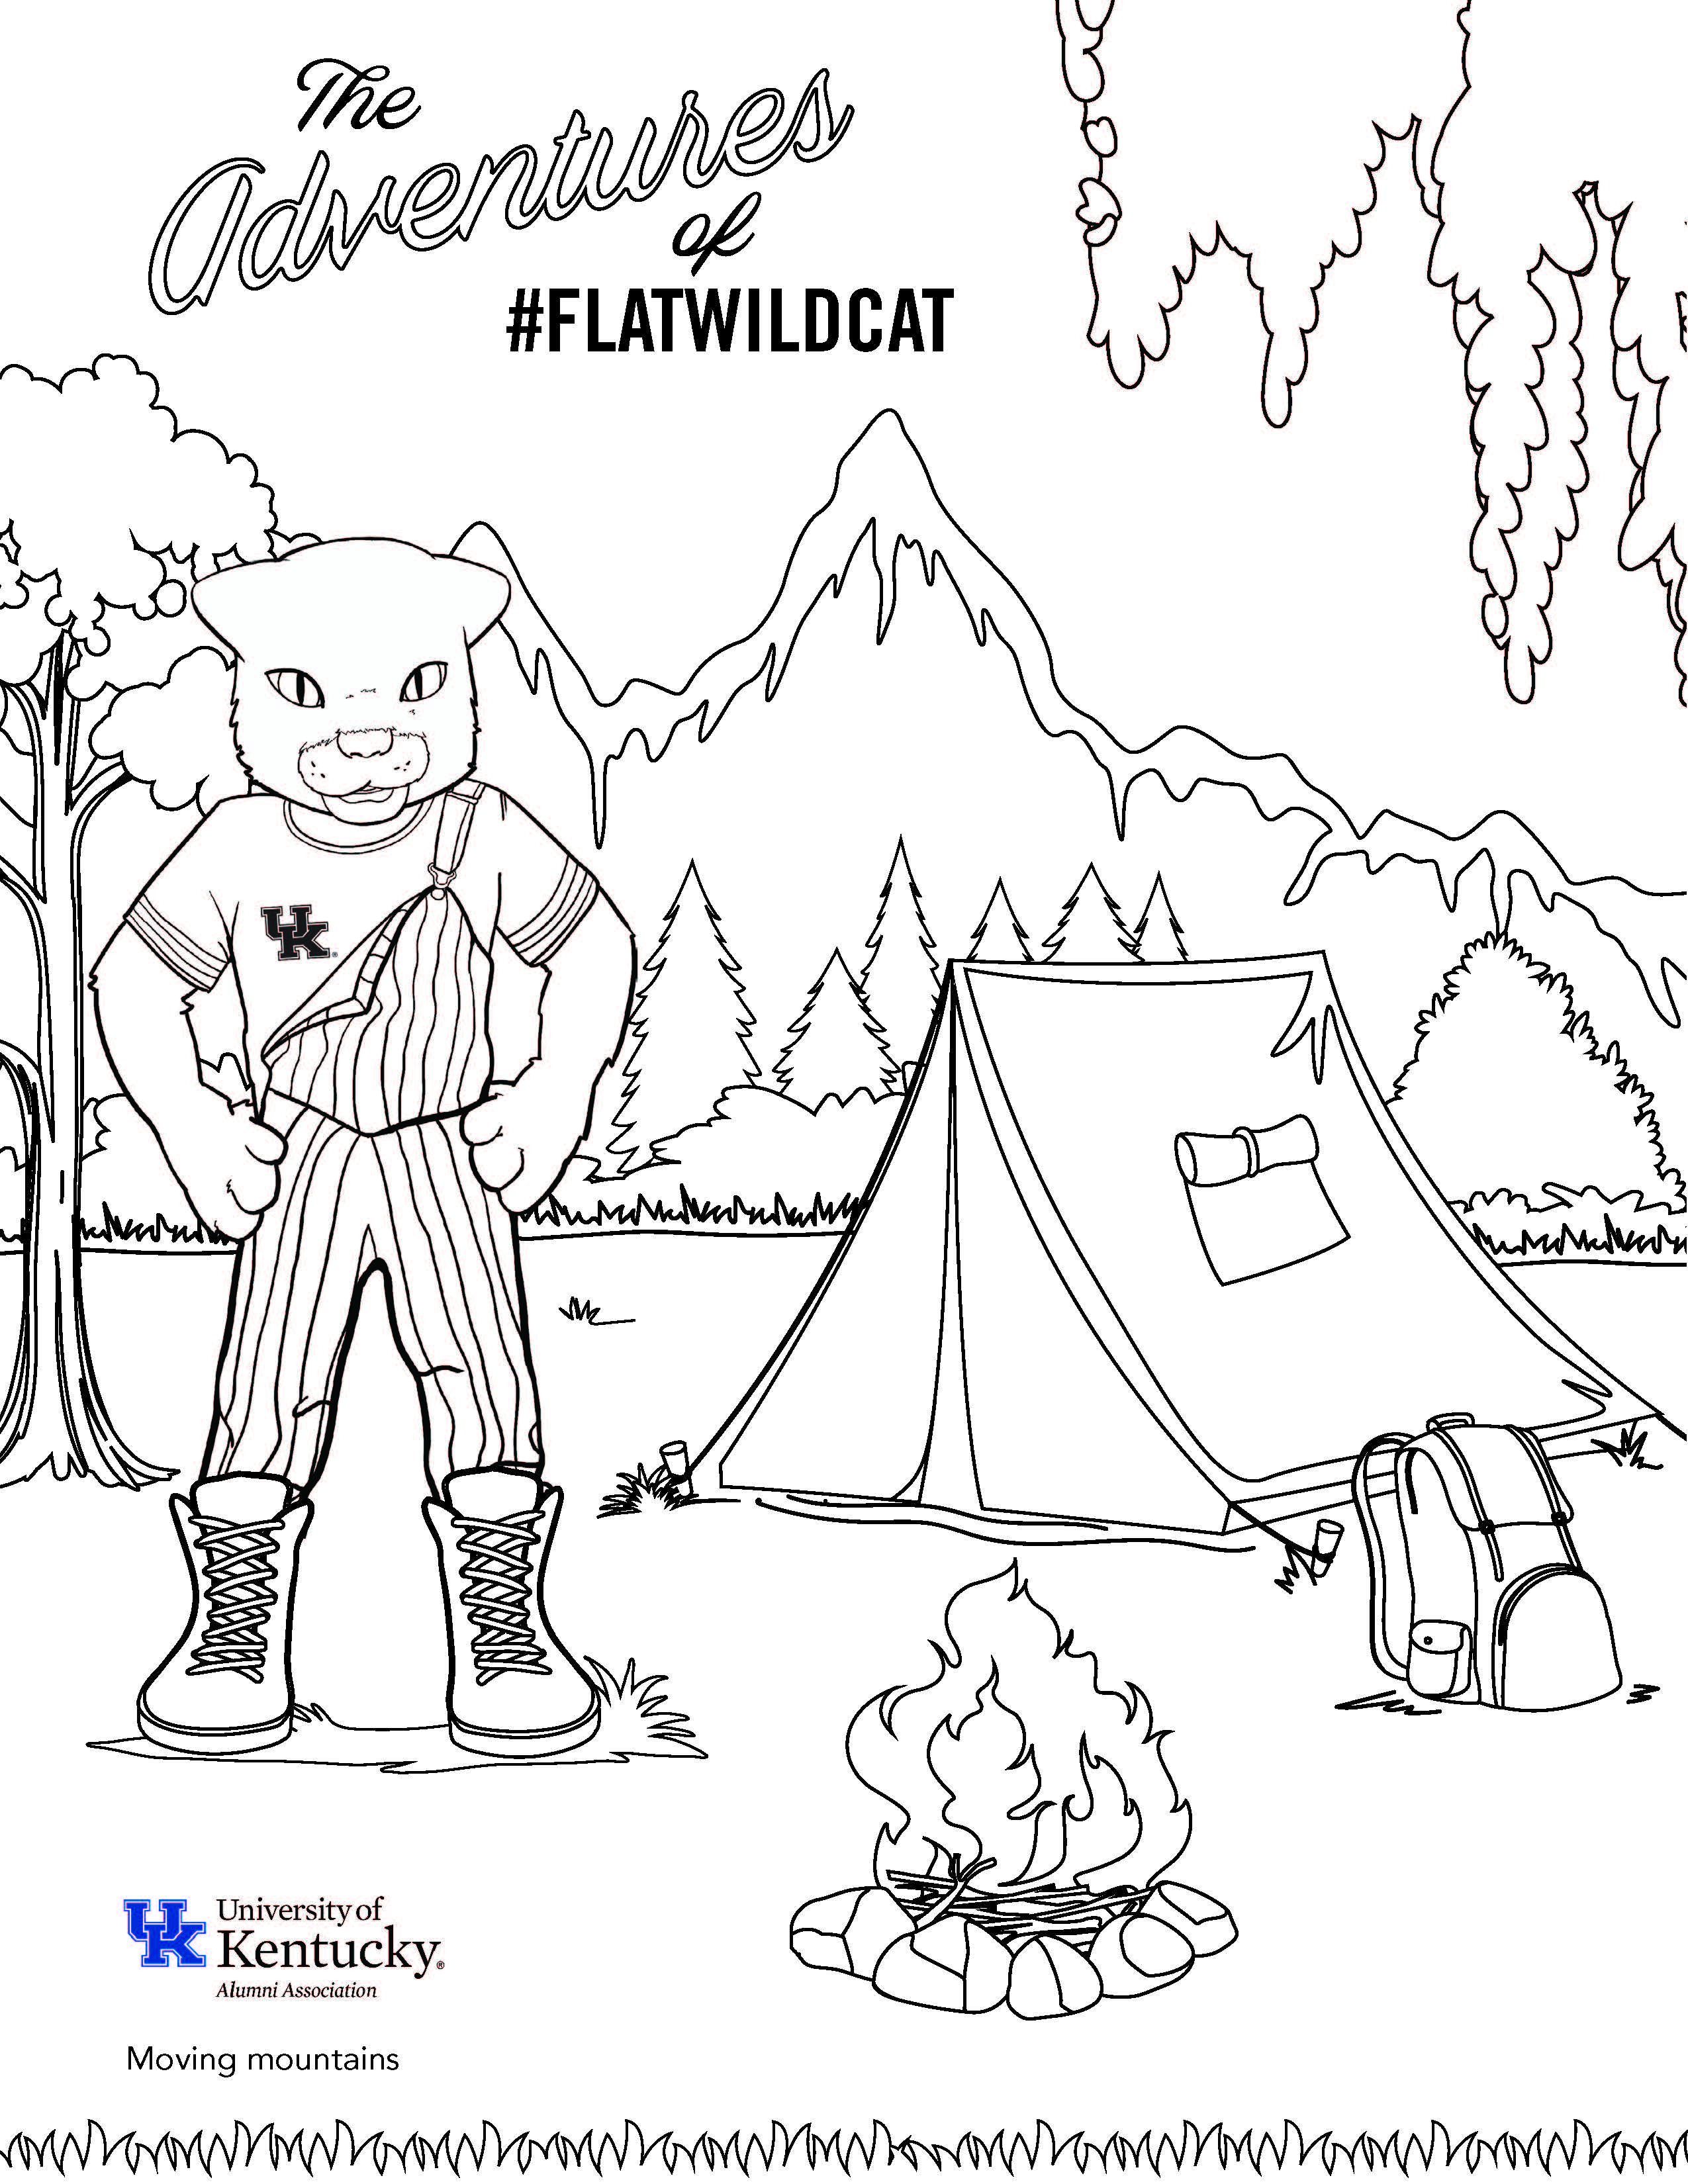 Kentucky Wildcats Basketball Coloring Pages Sketch Coloring Page